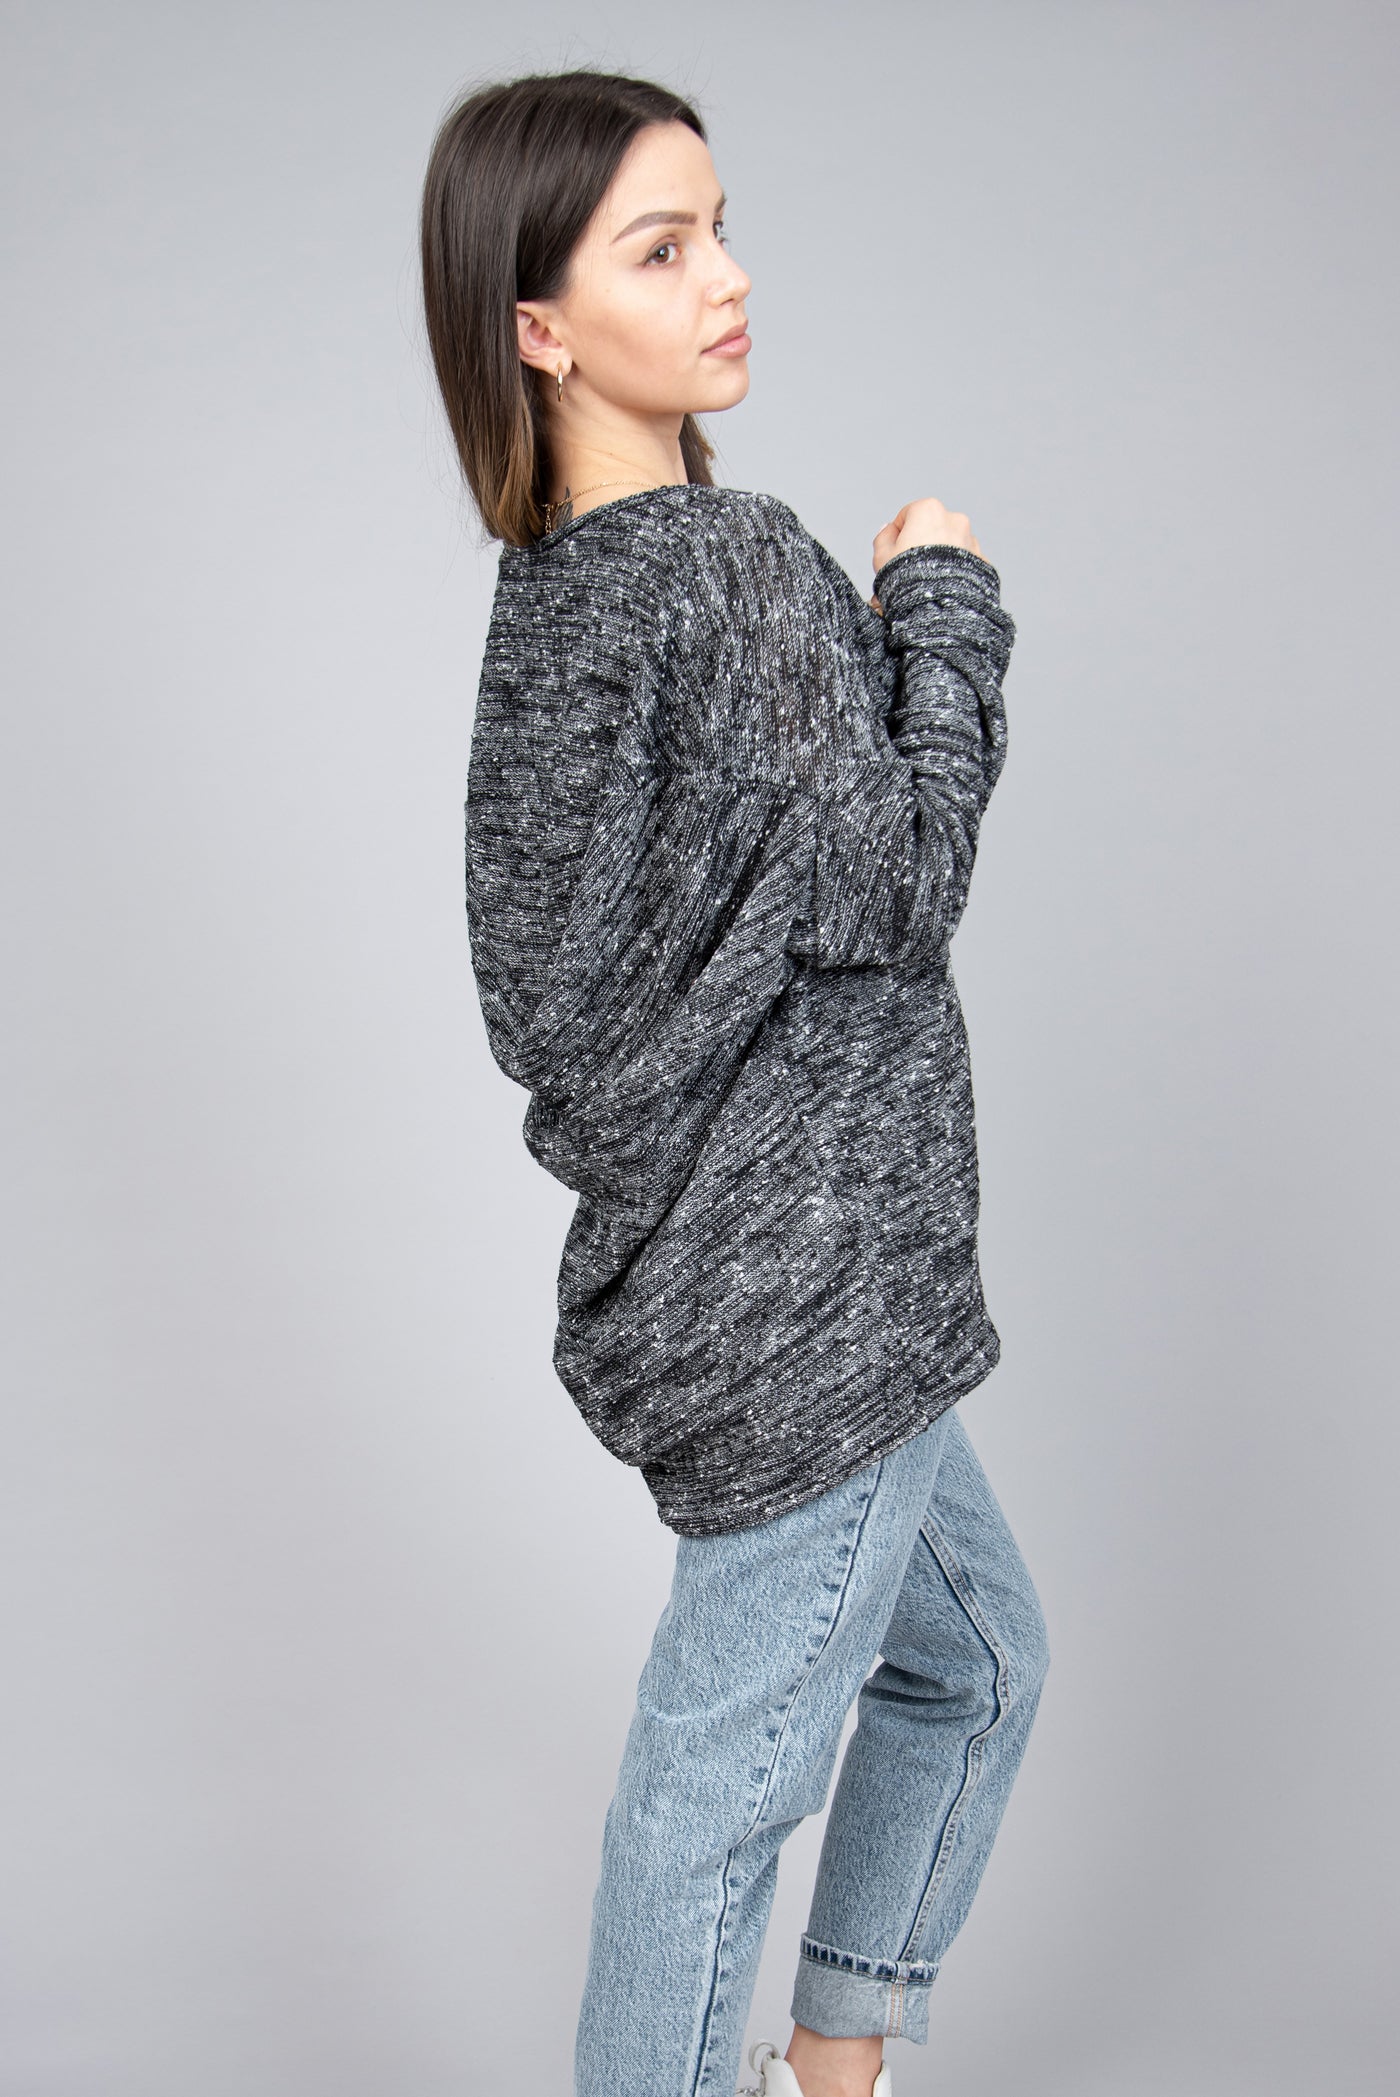 Loose gray knit top F1068